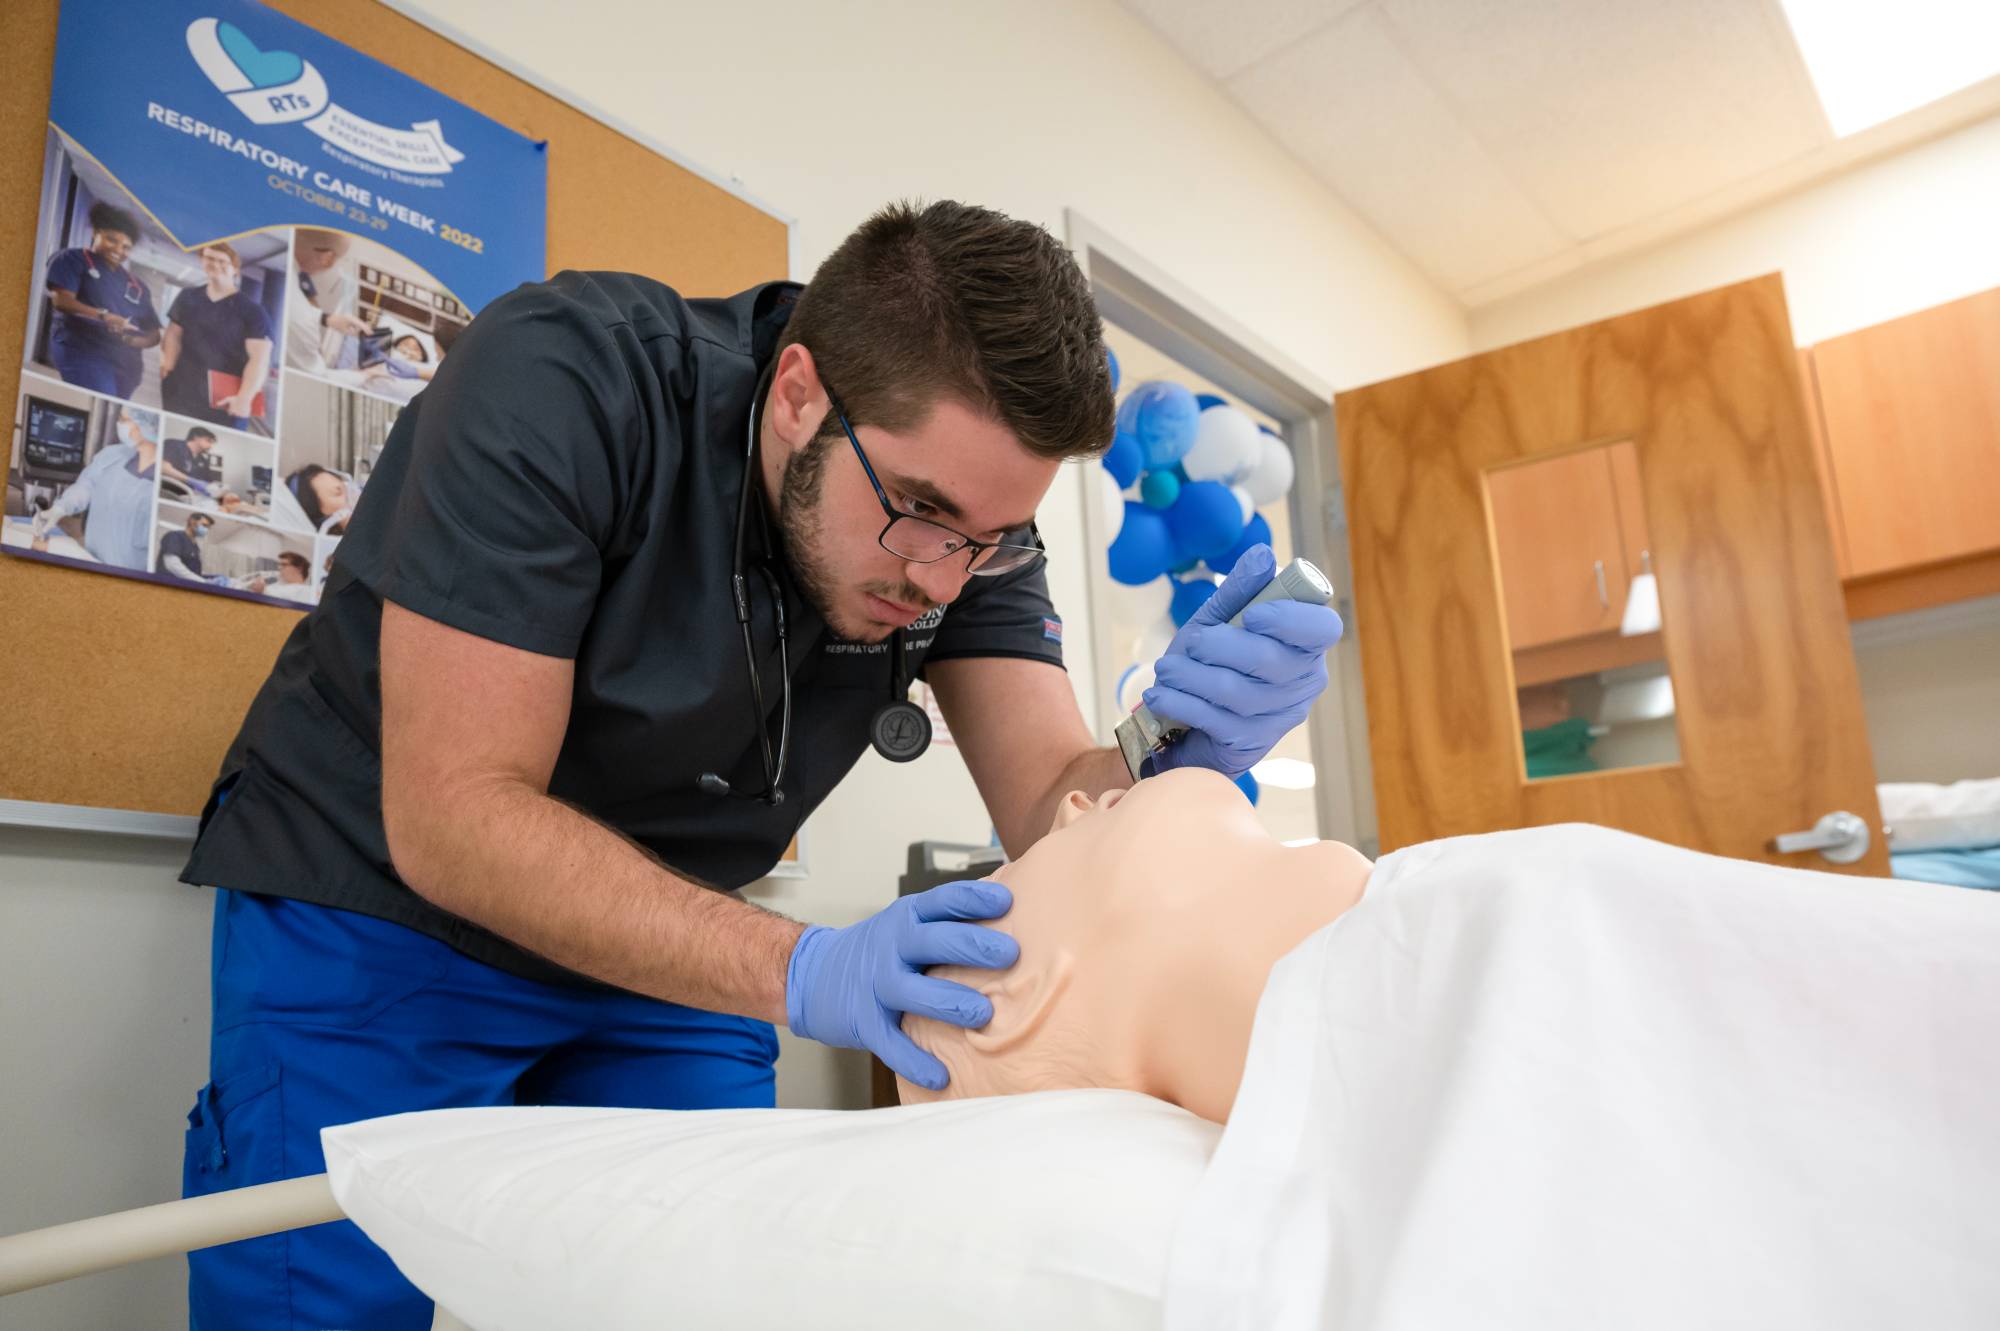 Respiratory therapy care student practicing skills